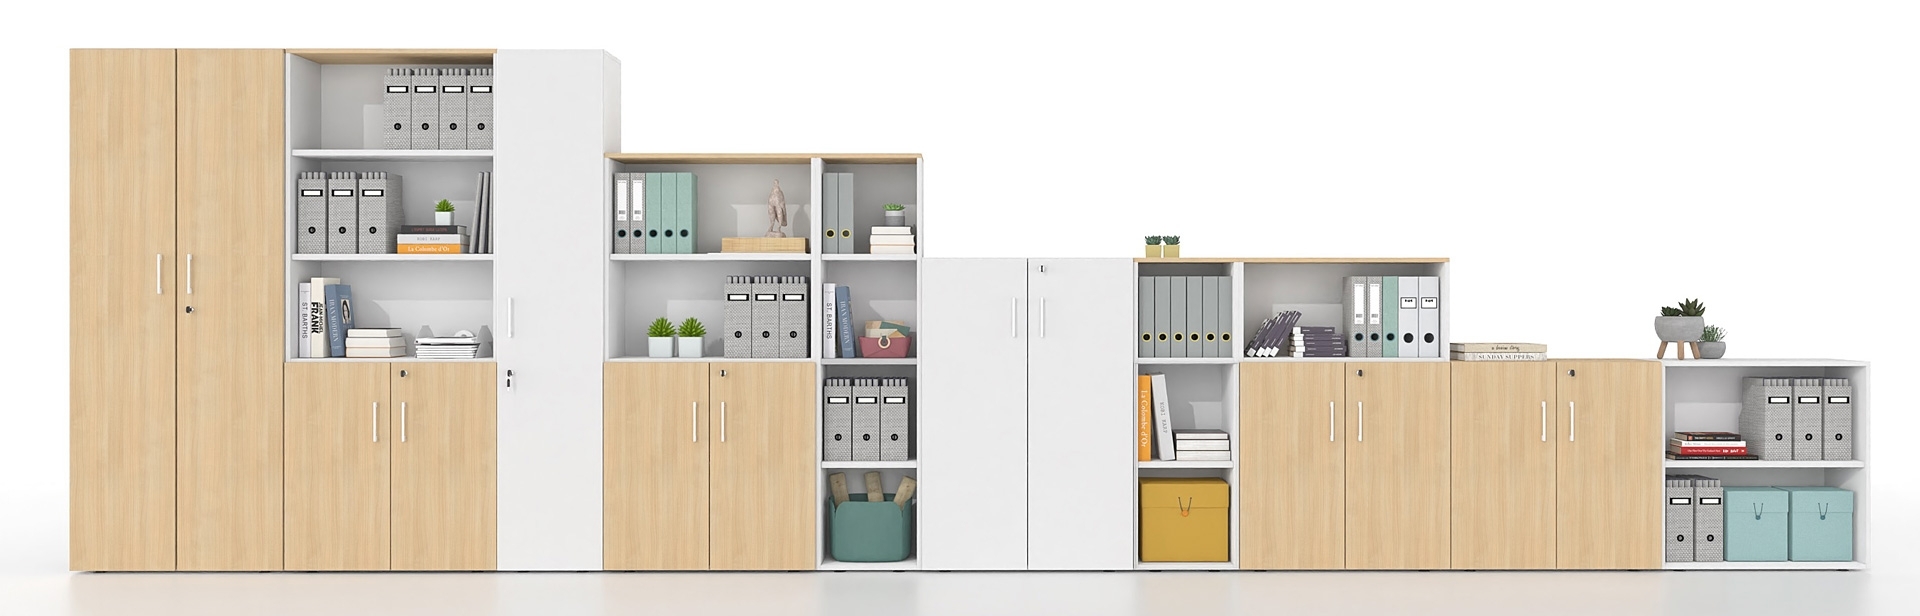 Melamine Cabinets Ideal For All Spaces | Dromeas